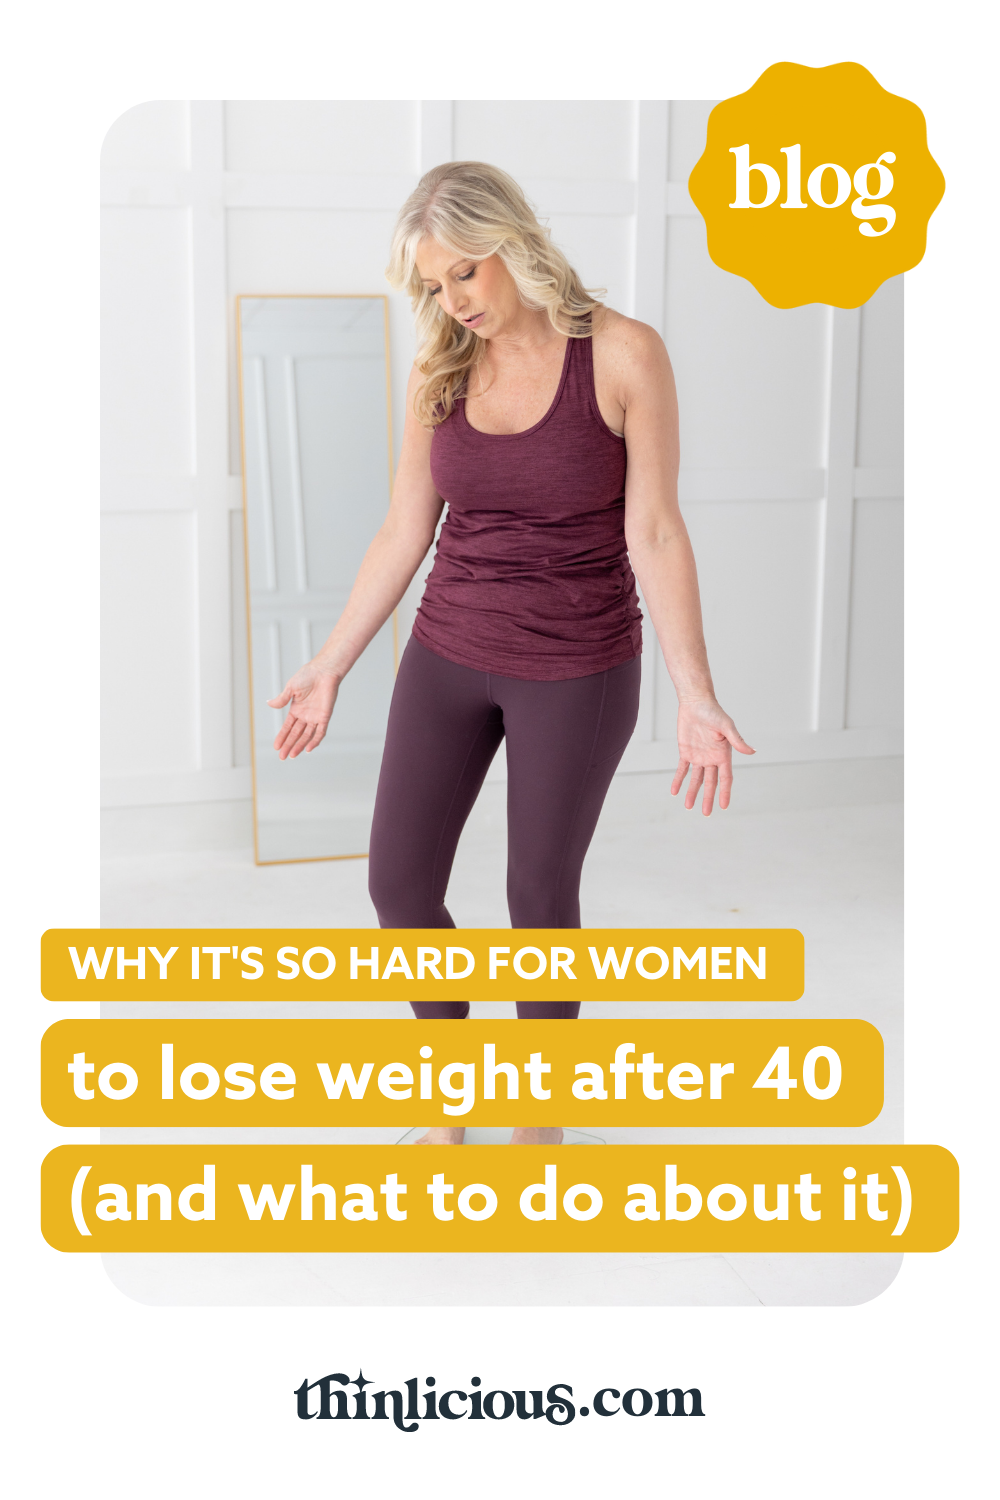 Why Losing Weight After 40 Is So Hard for Women (And What to Do About It)